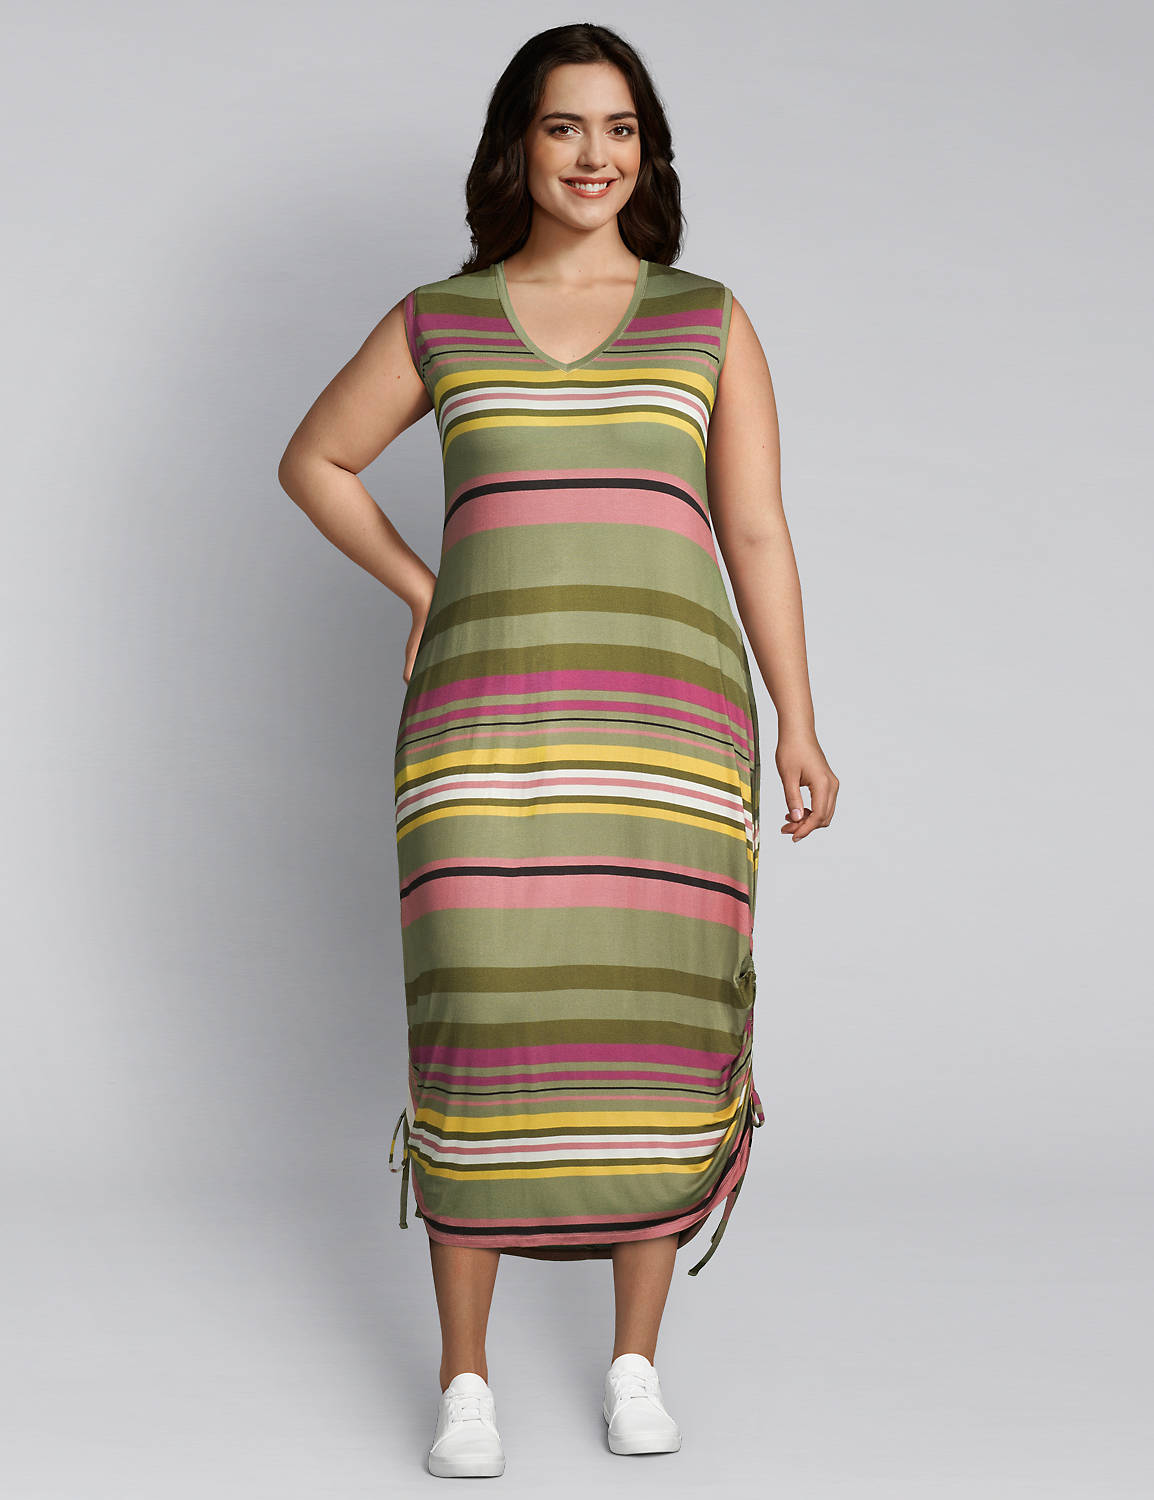 1114835 Sleeveless Vneck Side Ruched Midi - 190:LBSU20249_MultiSalsaStripe_ccolorway6:10/12 Product Image 1